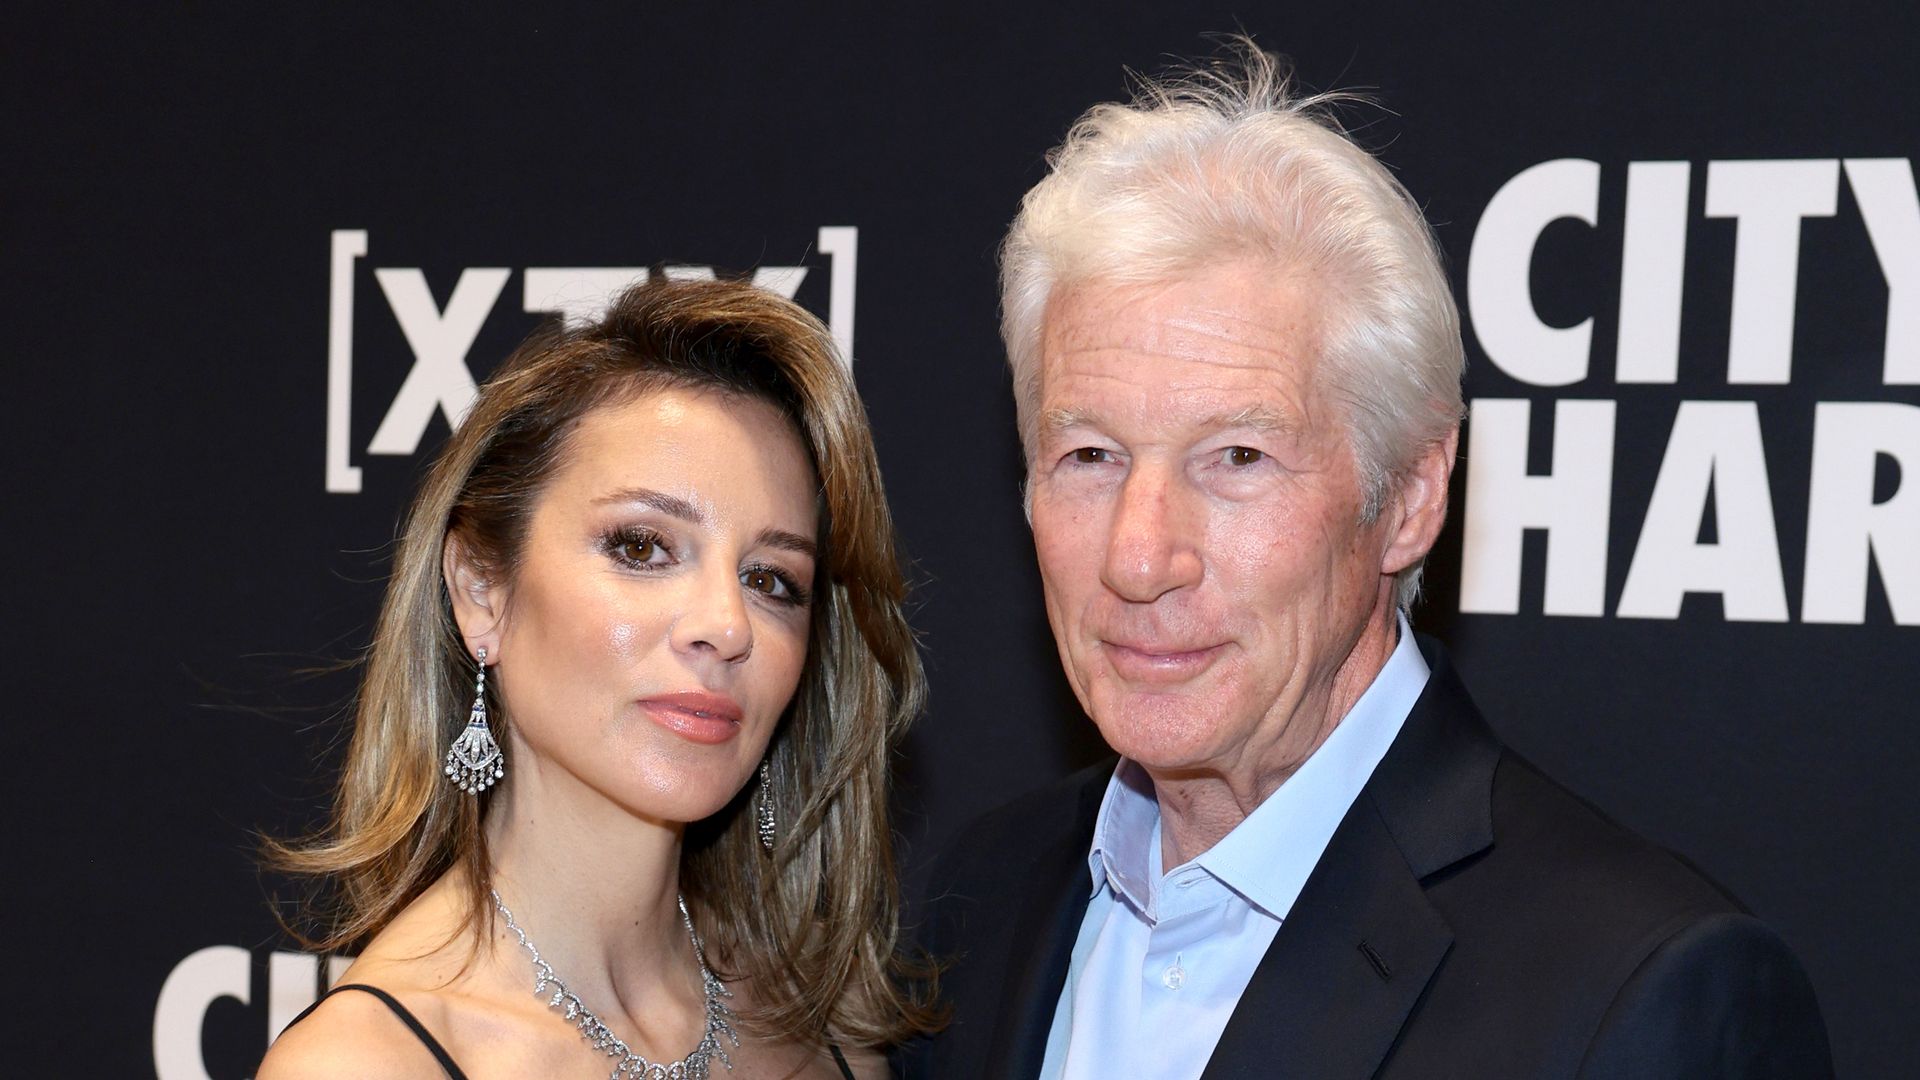 Richard Gere makes rare outing with wife Alejandra Silva on glamorous date night